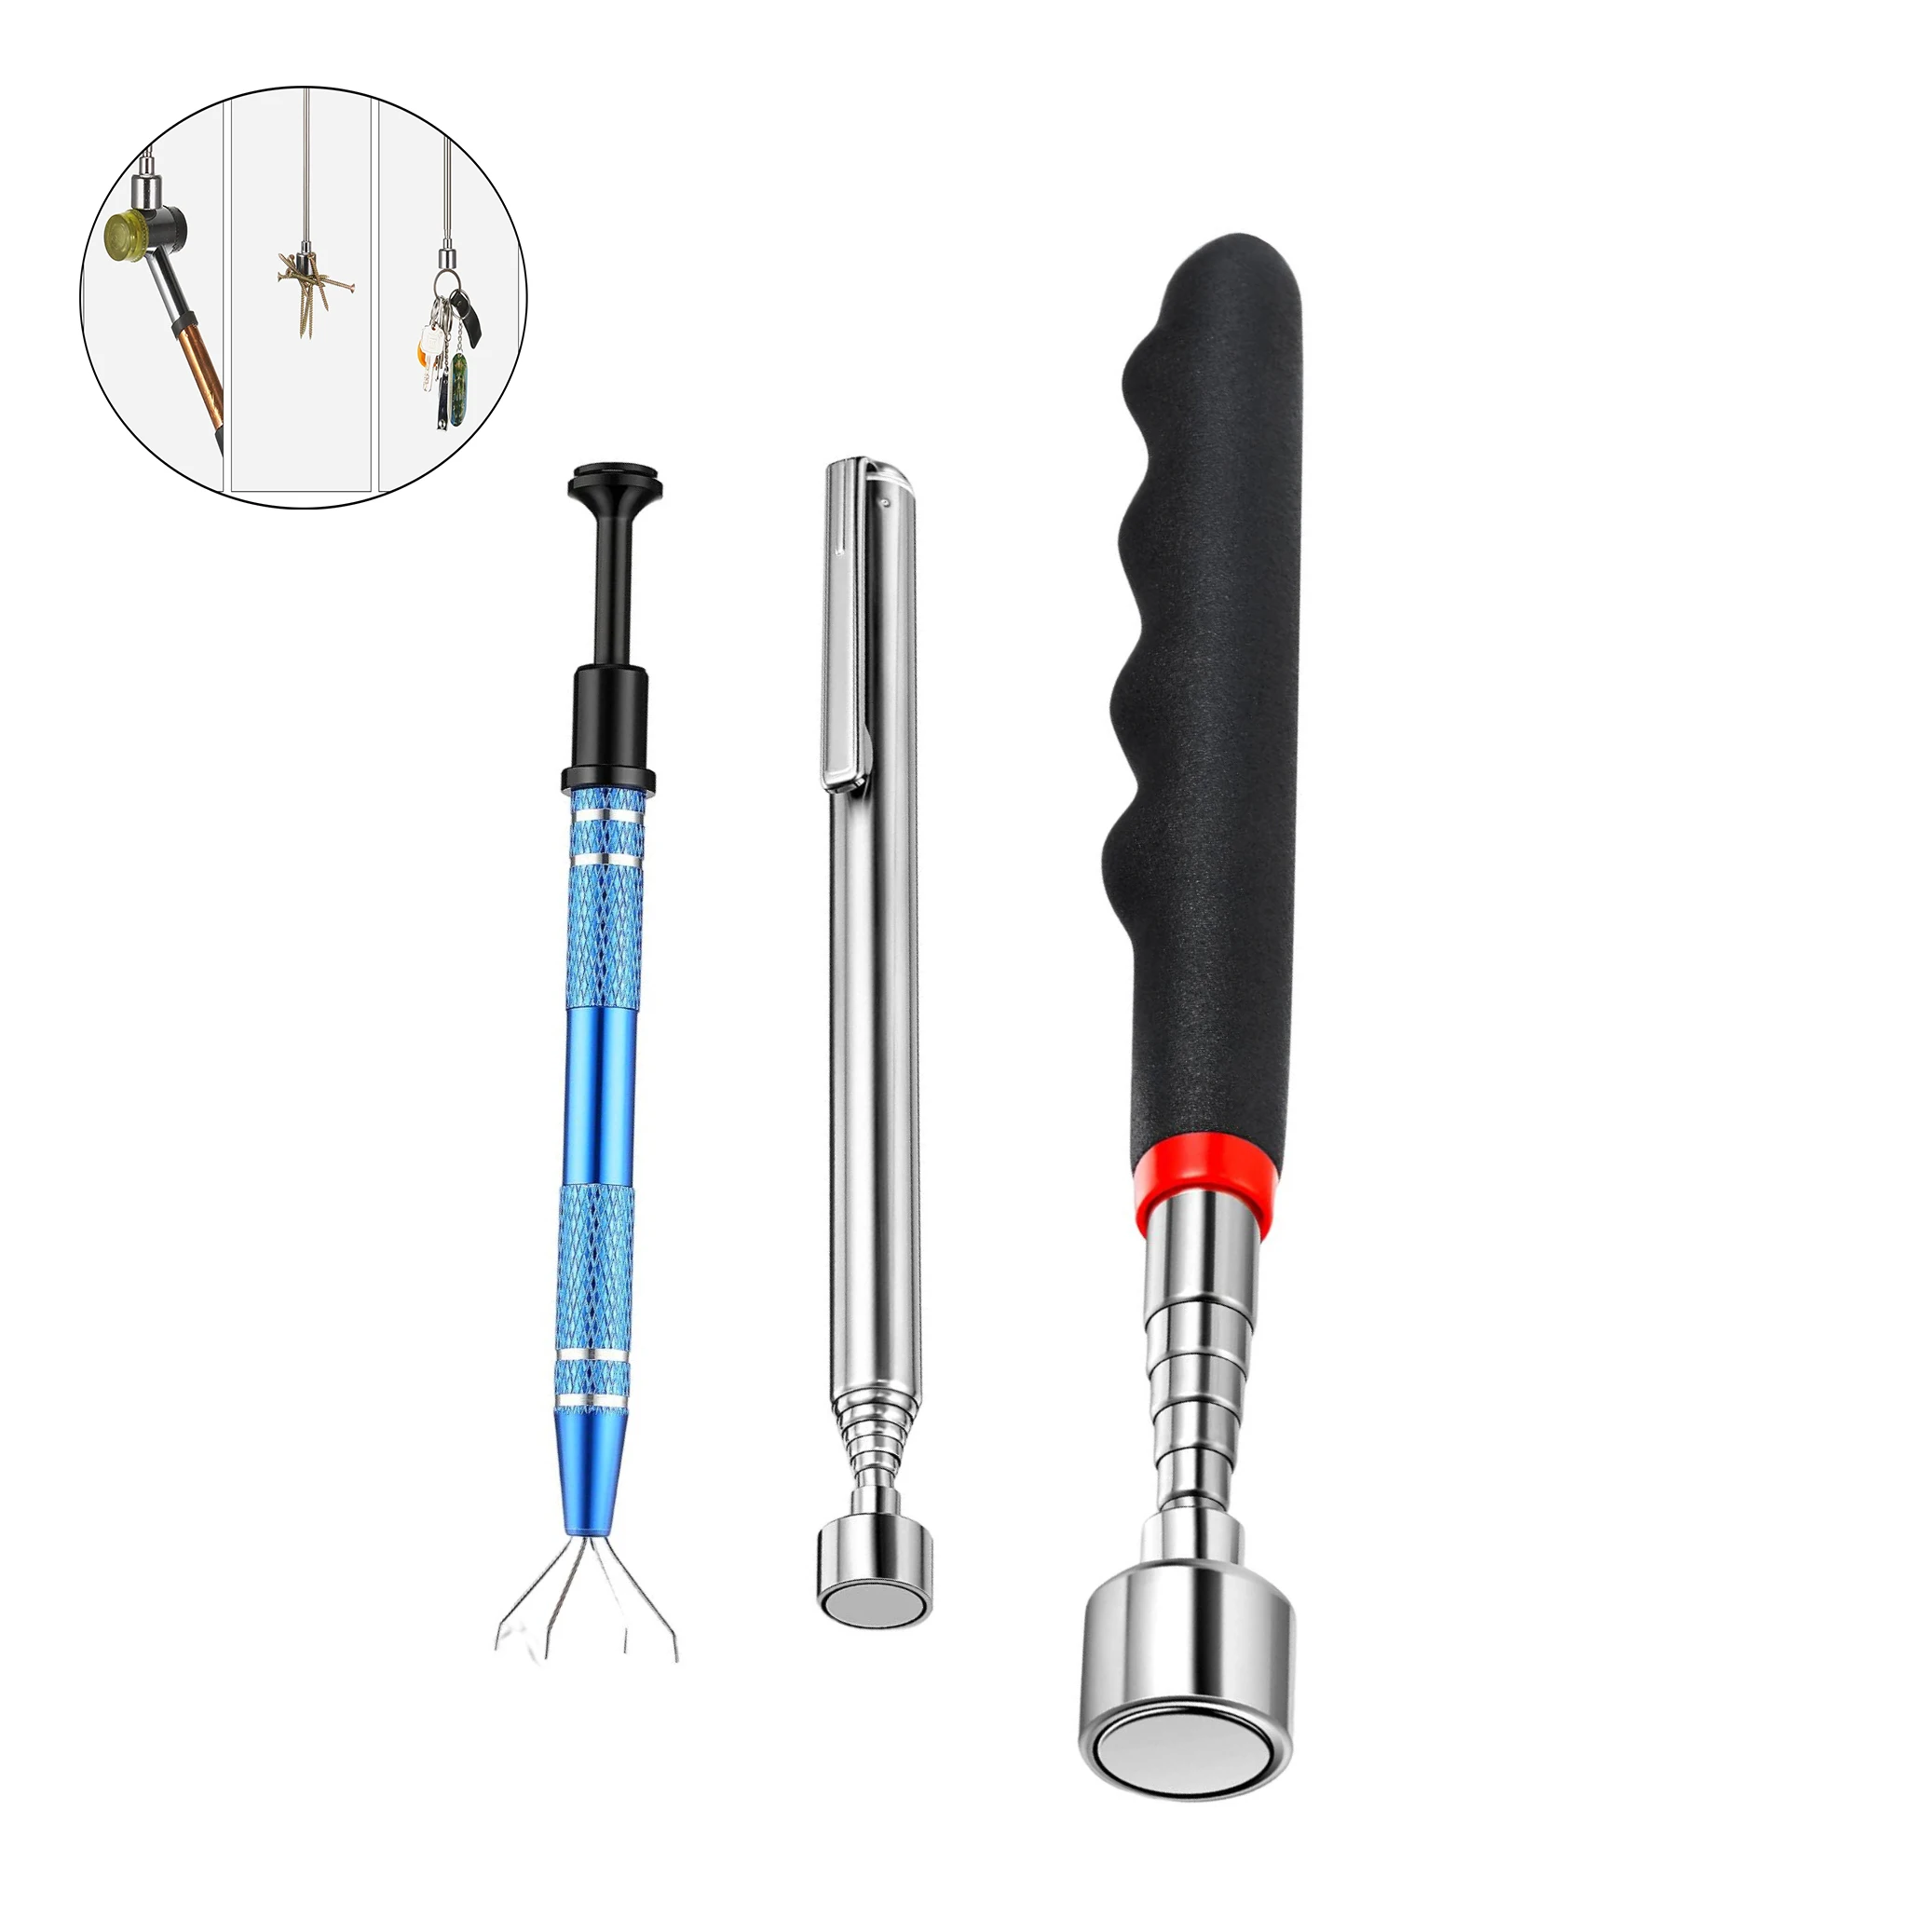 3pcs/set Metal Magnetic Retractable Pickup Tool for Jewelry Electronic Components Grabbing Trash Pickup with Magnetic Bar 4 Claw 3pcs one set of professional soft tip darts competition set 18g electronic darts student competition entertainment sports toys